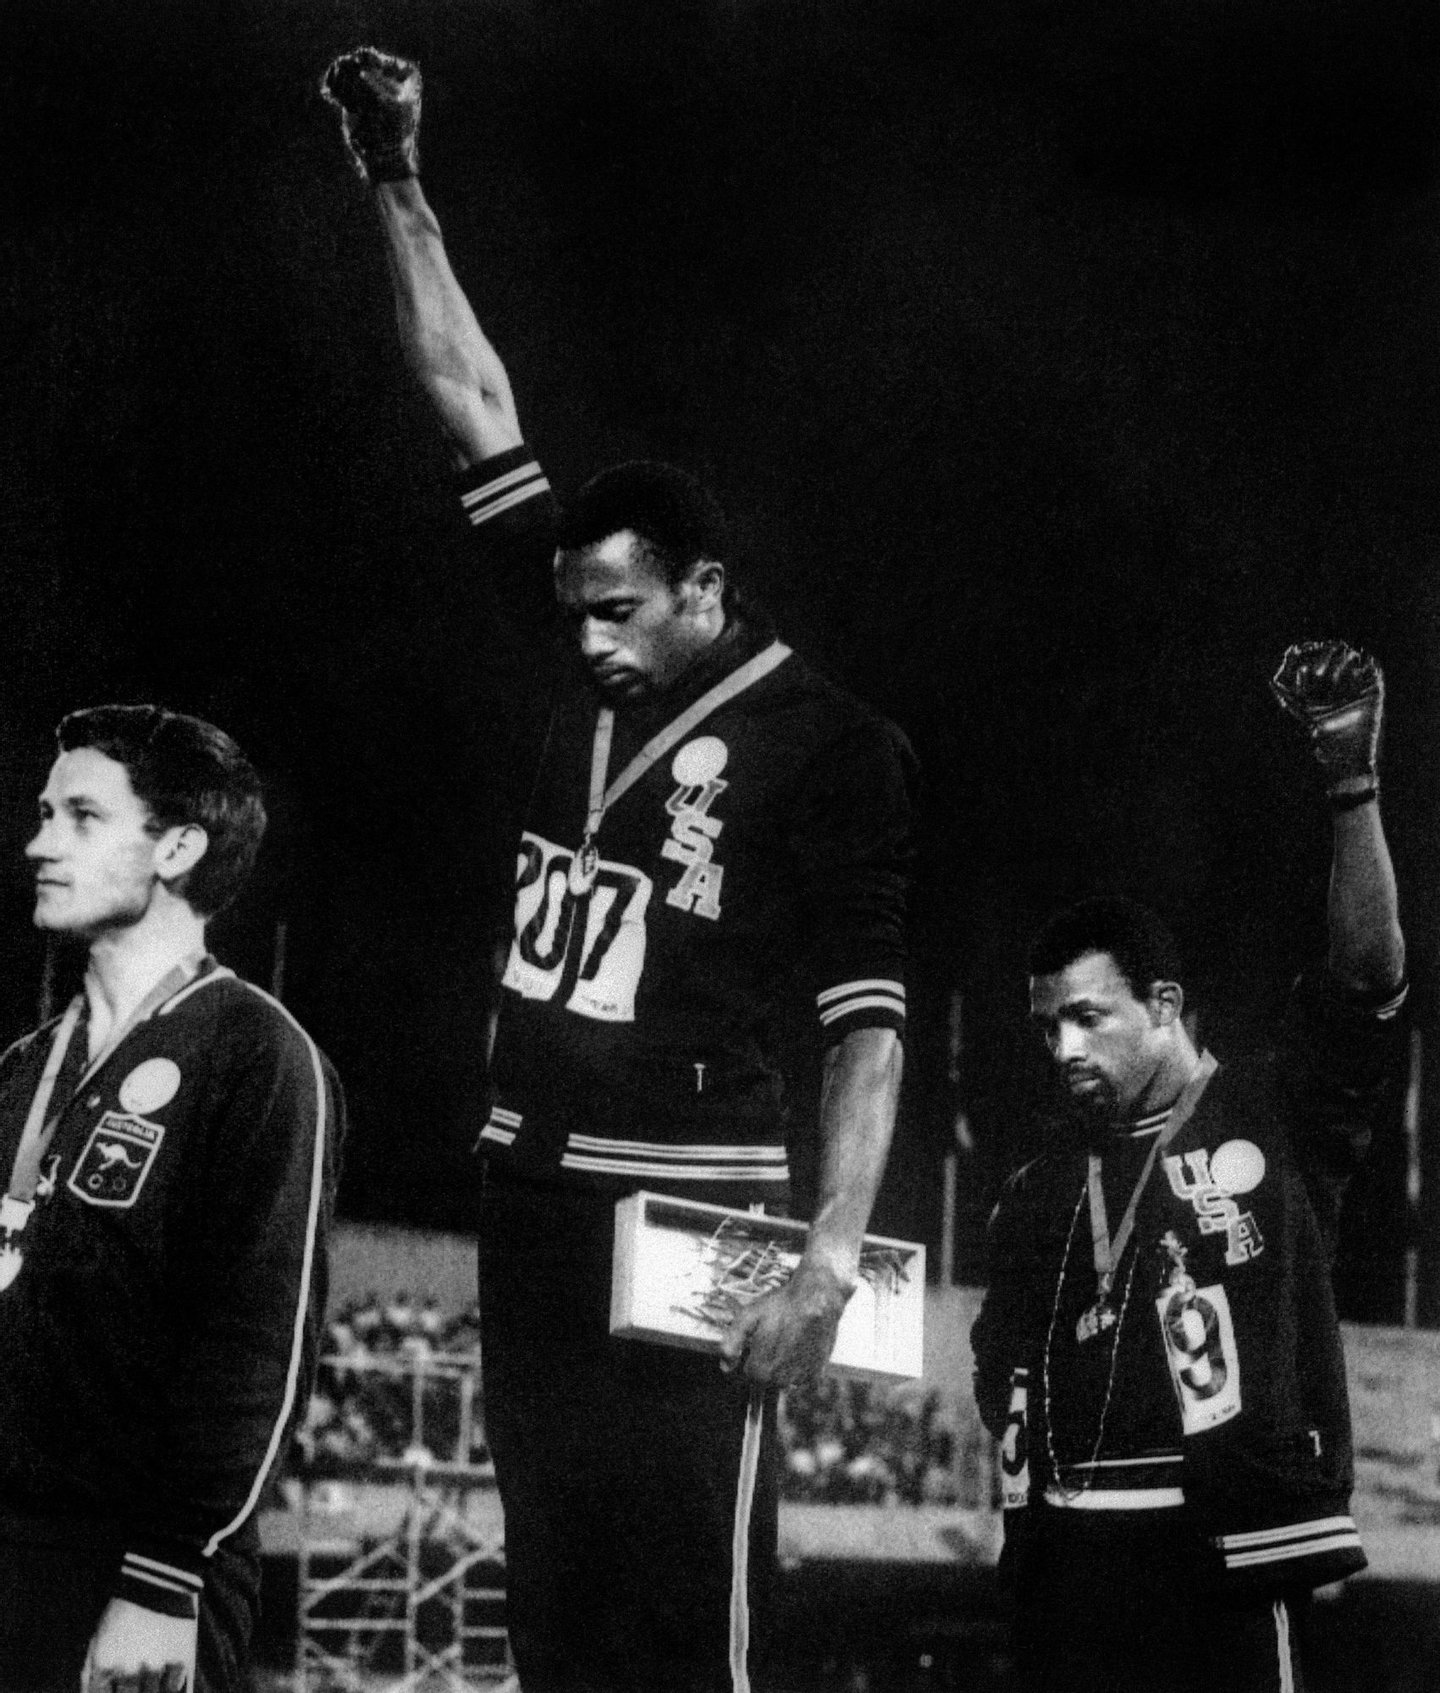 TO GO WITH AFP STORY BY JIM SLATER : "Forty years after Tommie Smith and John Carlos raised their fists in a civil rights gesture on the Olympic medal stand in Mexico City, protests on the podium could make a comeback in Beijing.". (FILES) US athletes Tommie Smith (C) and John Carlos (R) raise their gloved fists in the Black Power salute to express their opposition to racism in the USA during the US national anthem, after receiving their medals 17 October 1968 for first and third place in the men's 200m event at the Mexico Olympic Games. At left is Peter Norman of Australia who took second place. / AFP / EPU / - (Photo credit should read -/AFP/Getty Images)